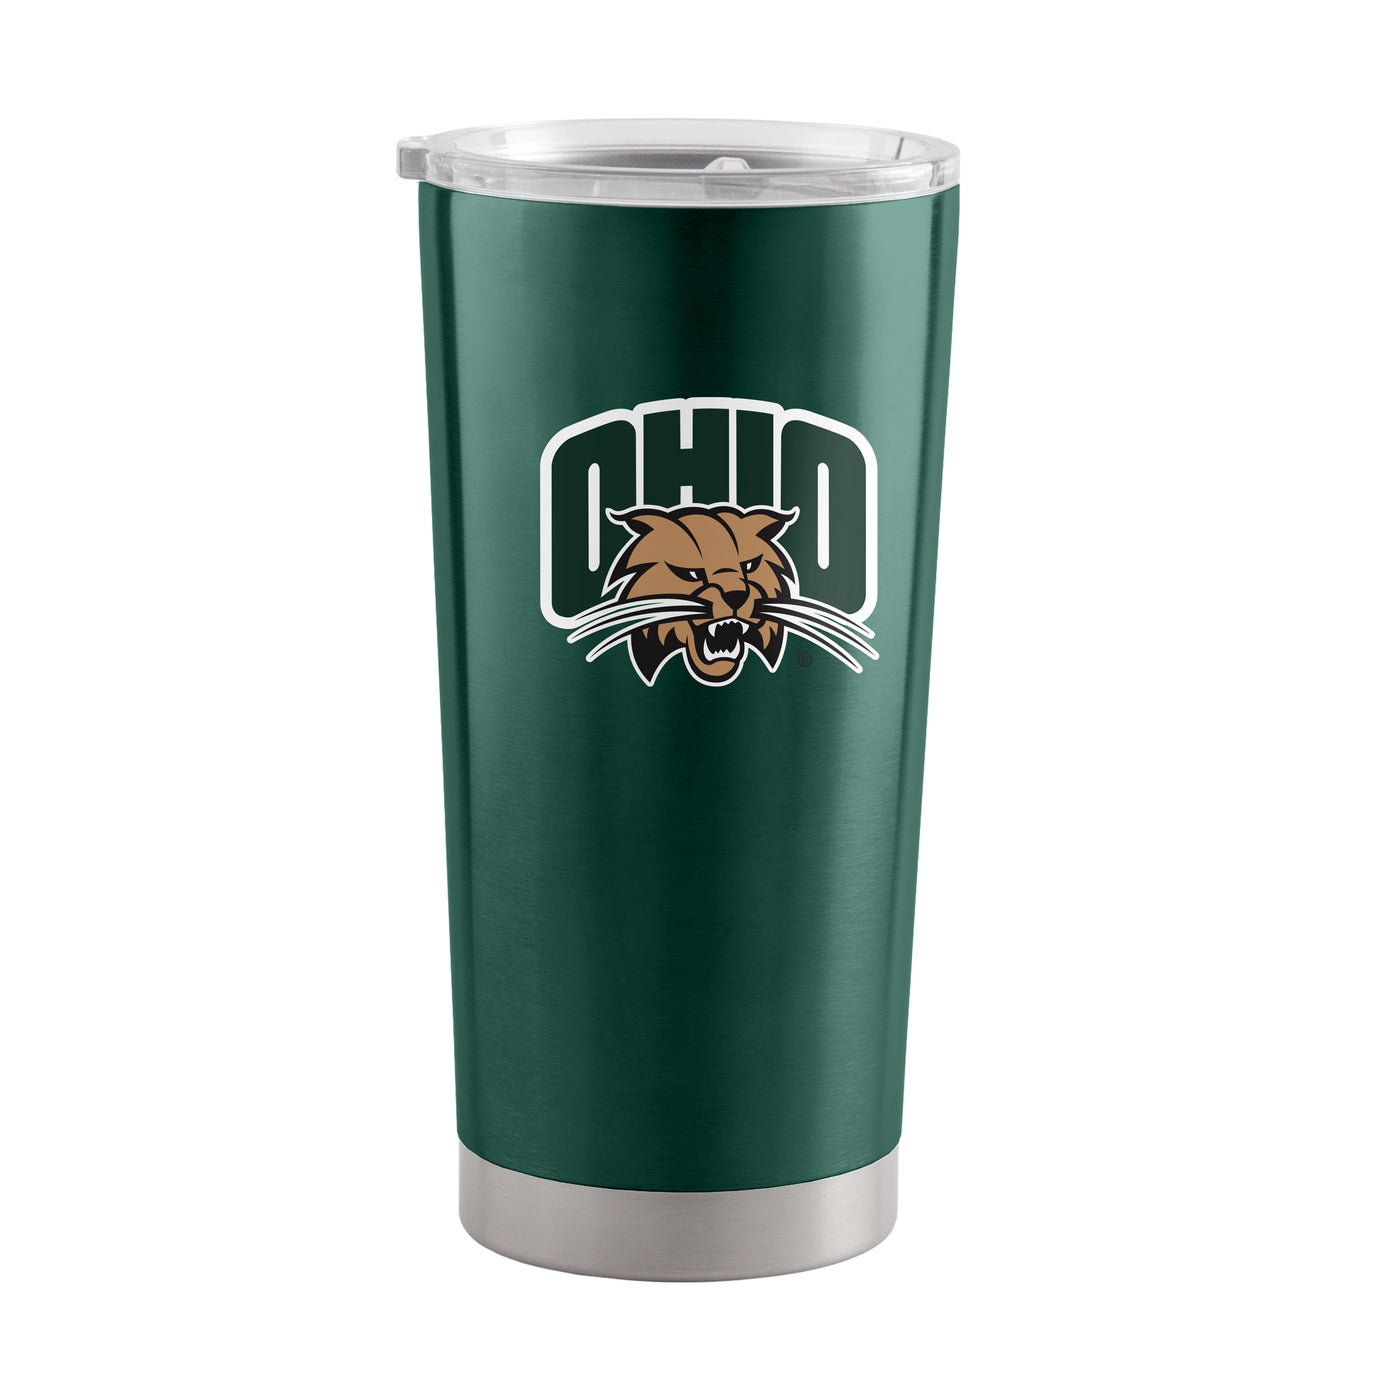 Ohio Bobcats 20oz Swagger Stainless Steel Tumbler